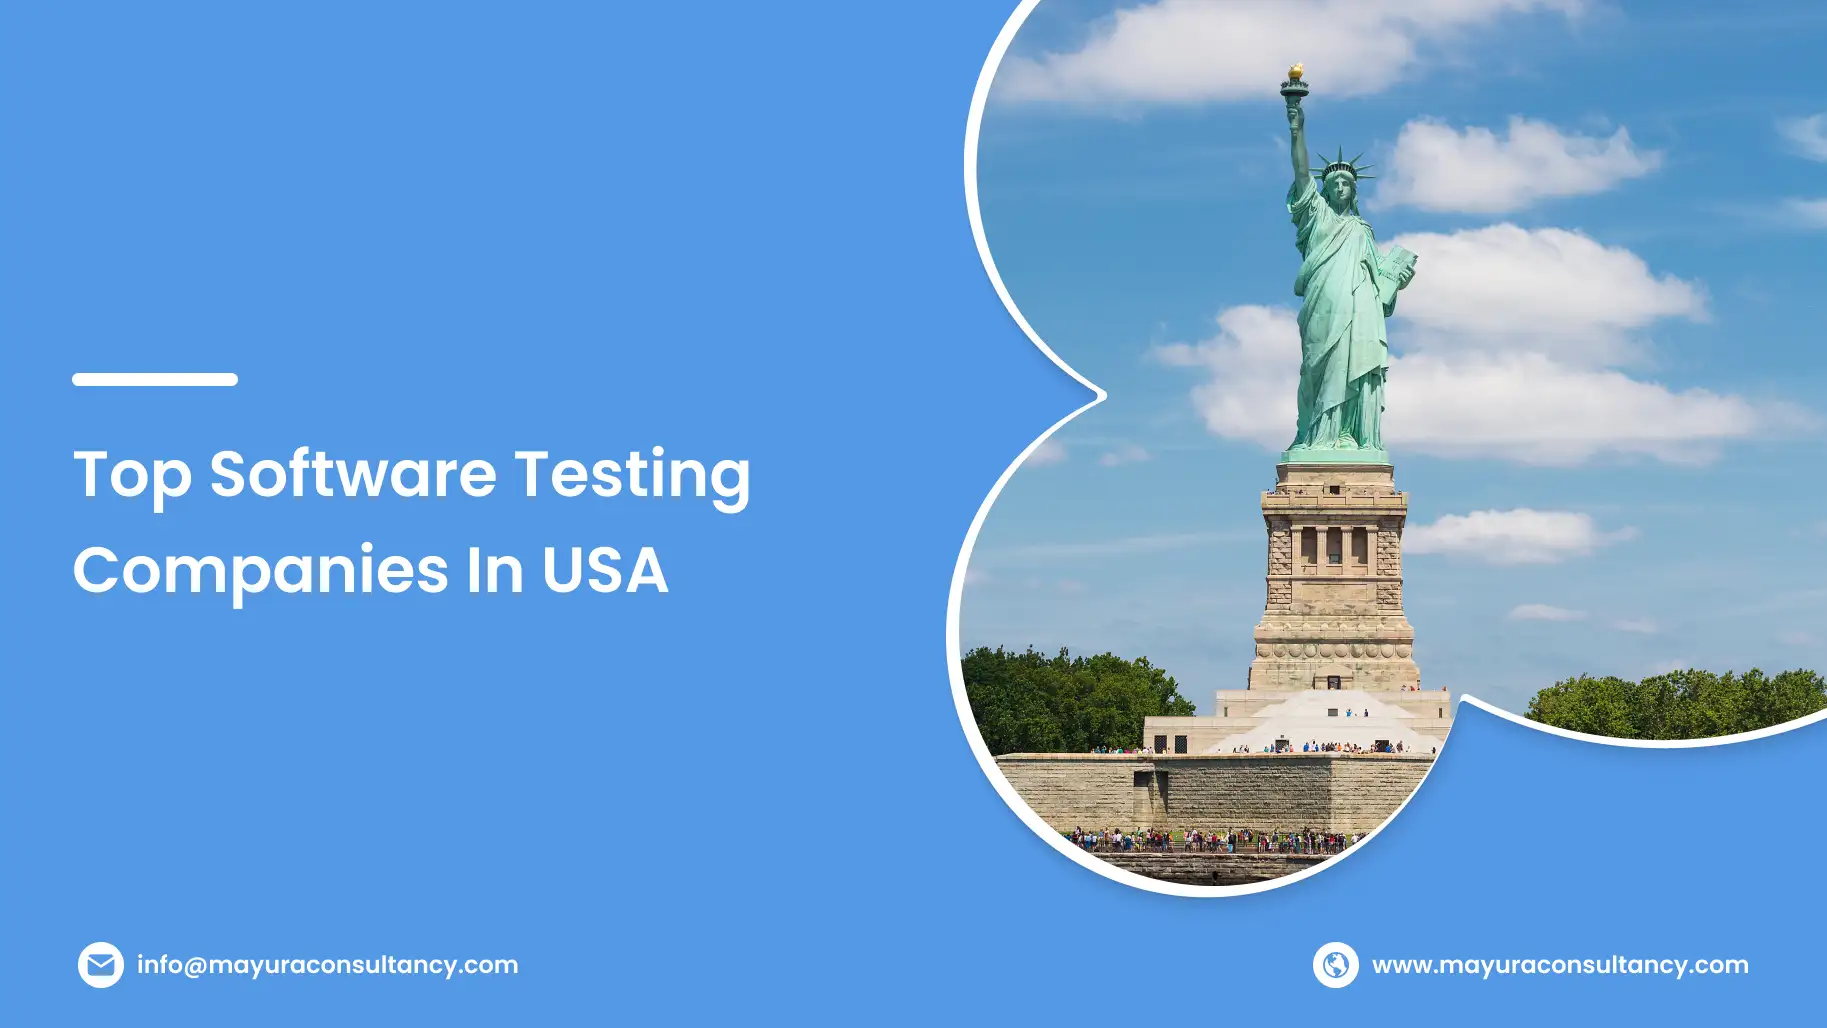 Top Software Testing Companies in USA